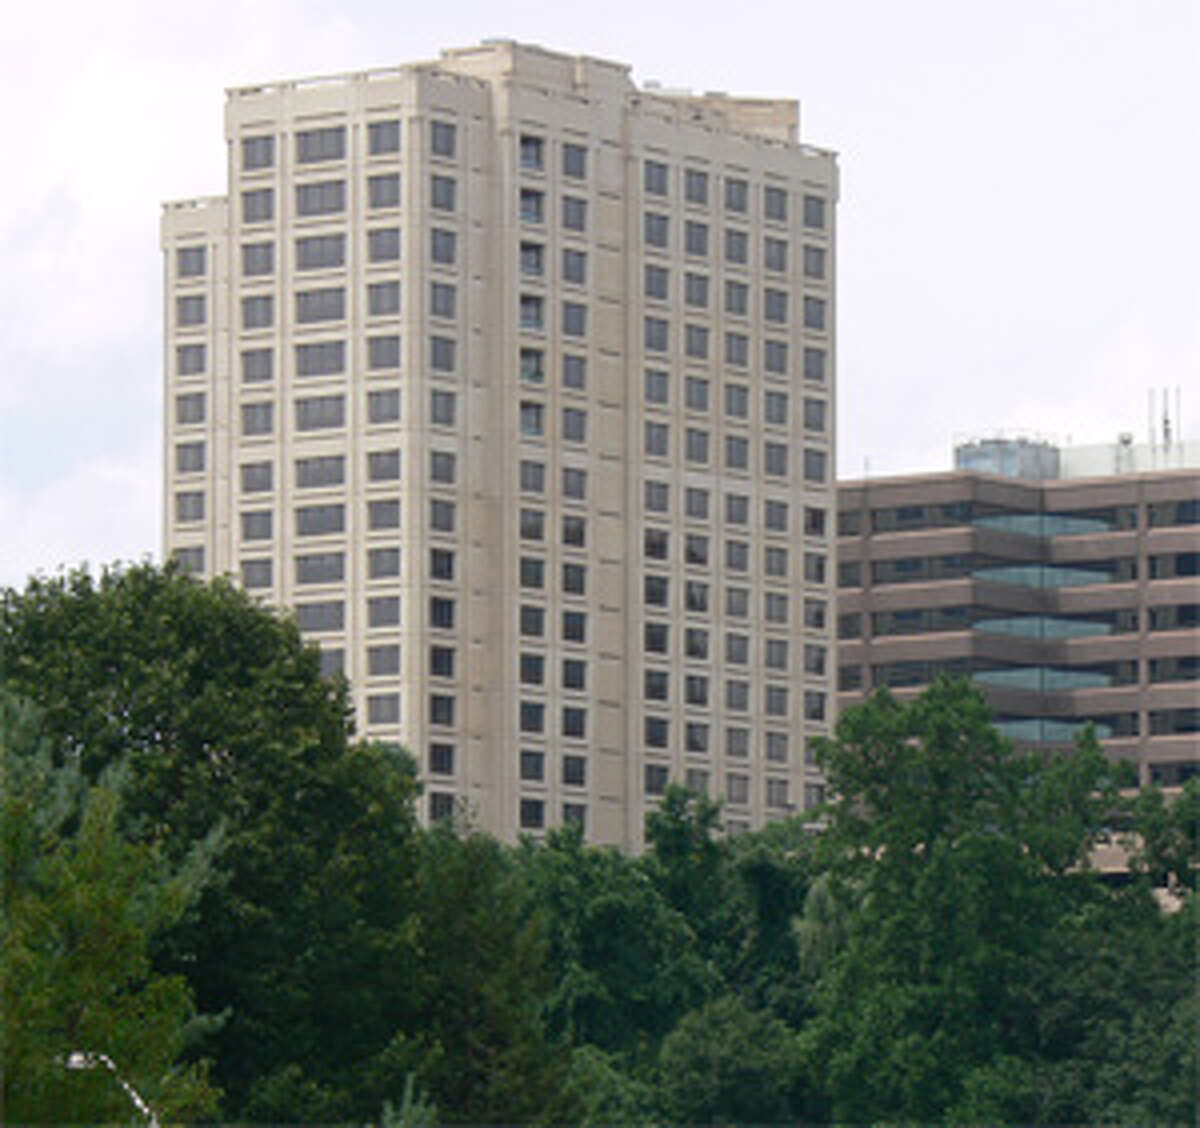 A view of R.D. Scinto’s The Renaissance, a 17-story residential structure in Shelton with apartments and condos.